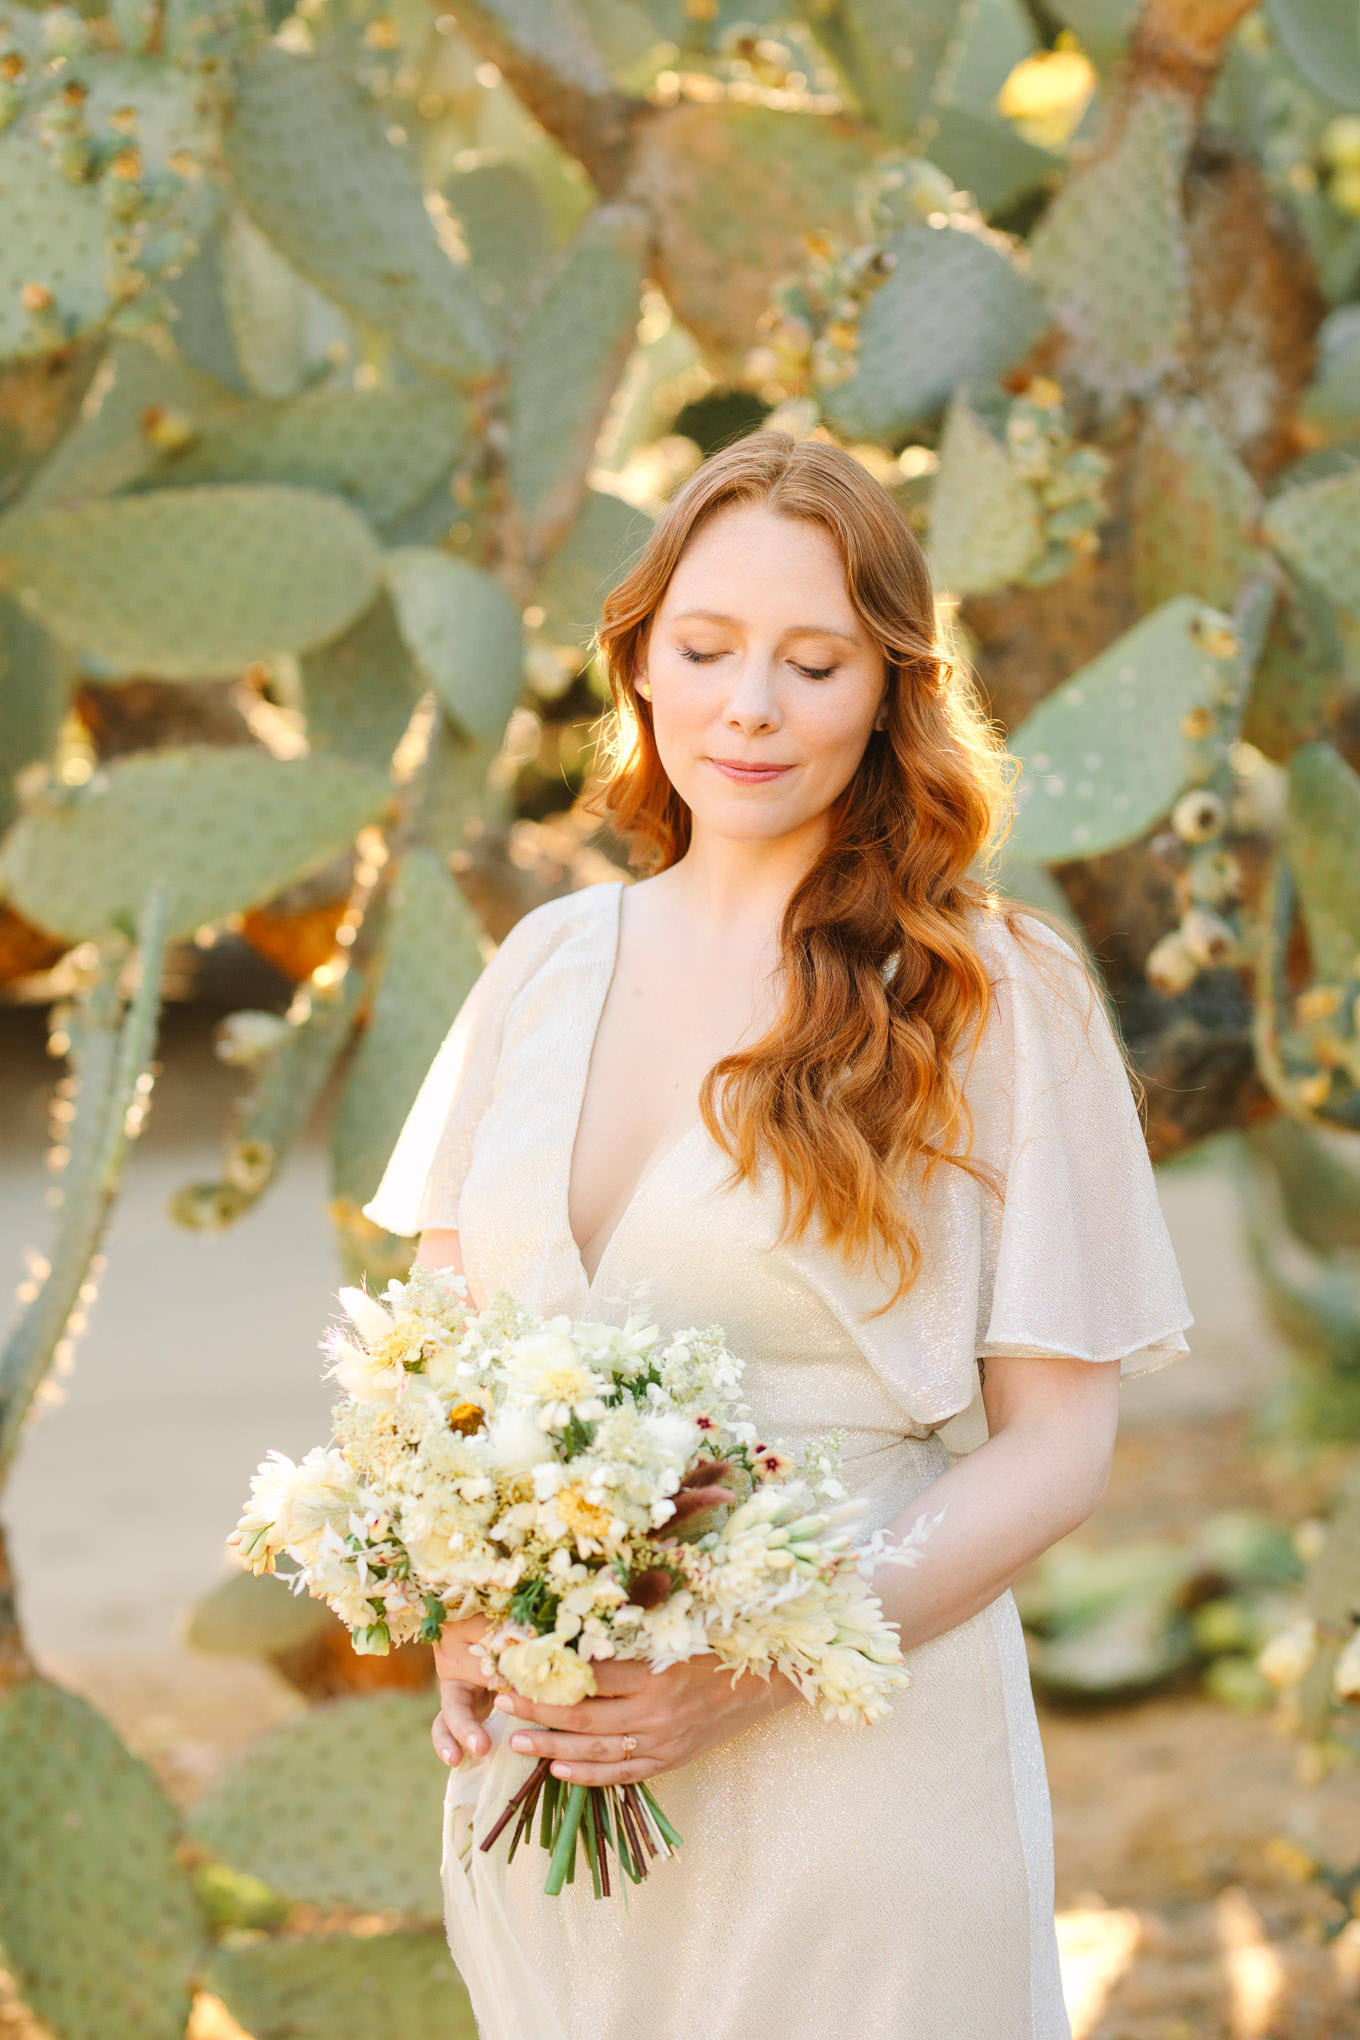 Bride with red hair in front of cacti | Los Angeles Arboretum Elopement | Colorful and elevated wedding photography for fun-loving couples in Southern California | #LosAngelesElopement #elopement #LAarboretum #LAskyline #elopementphotos   Source: Mary Costa Photography | Los Angeles